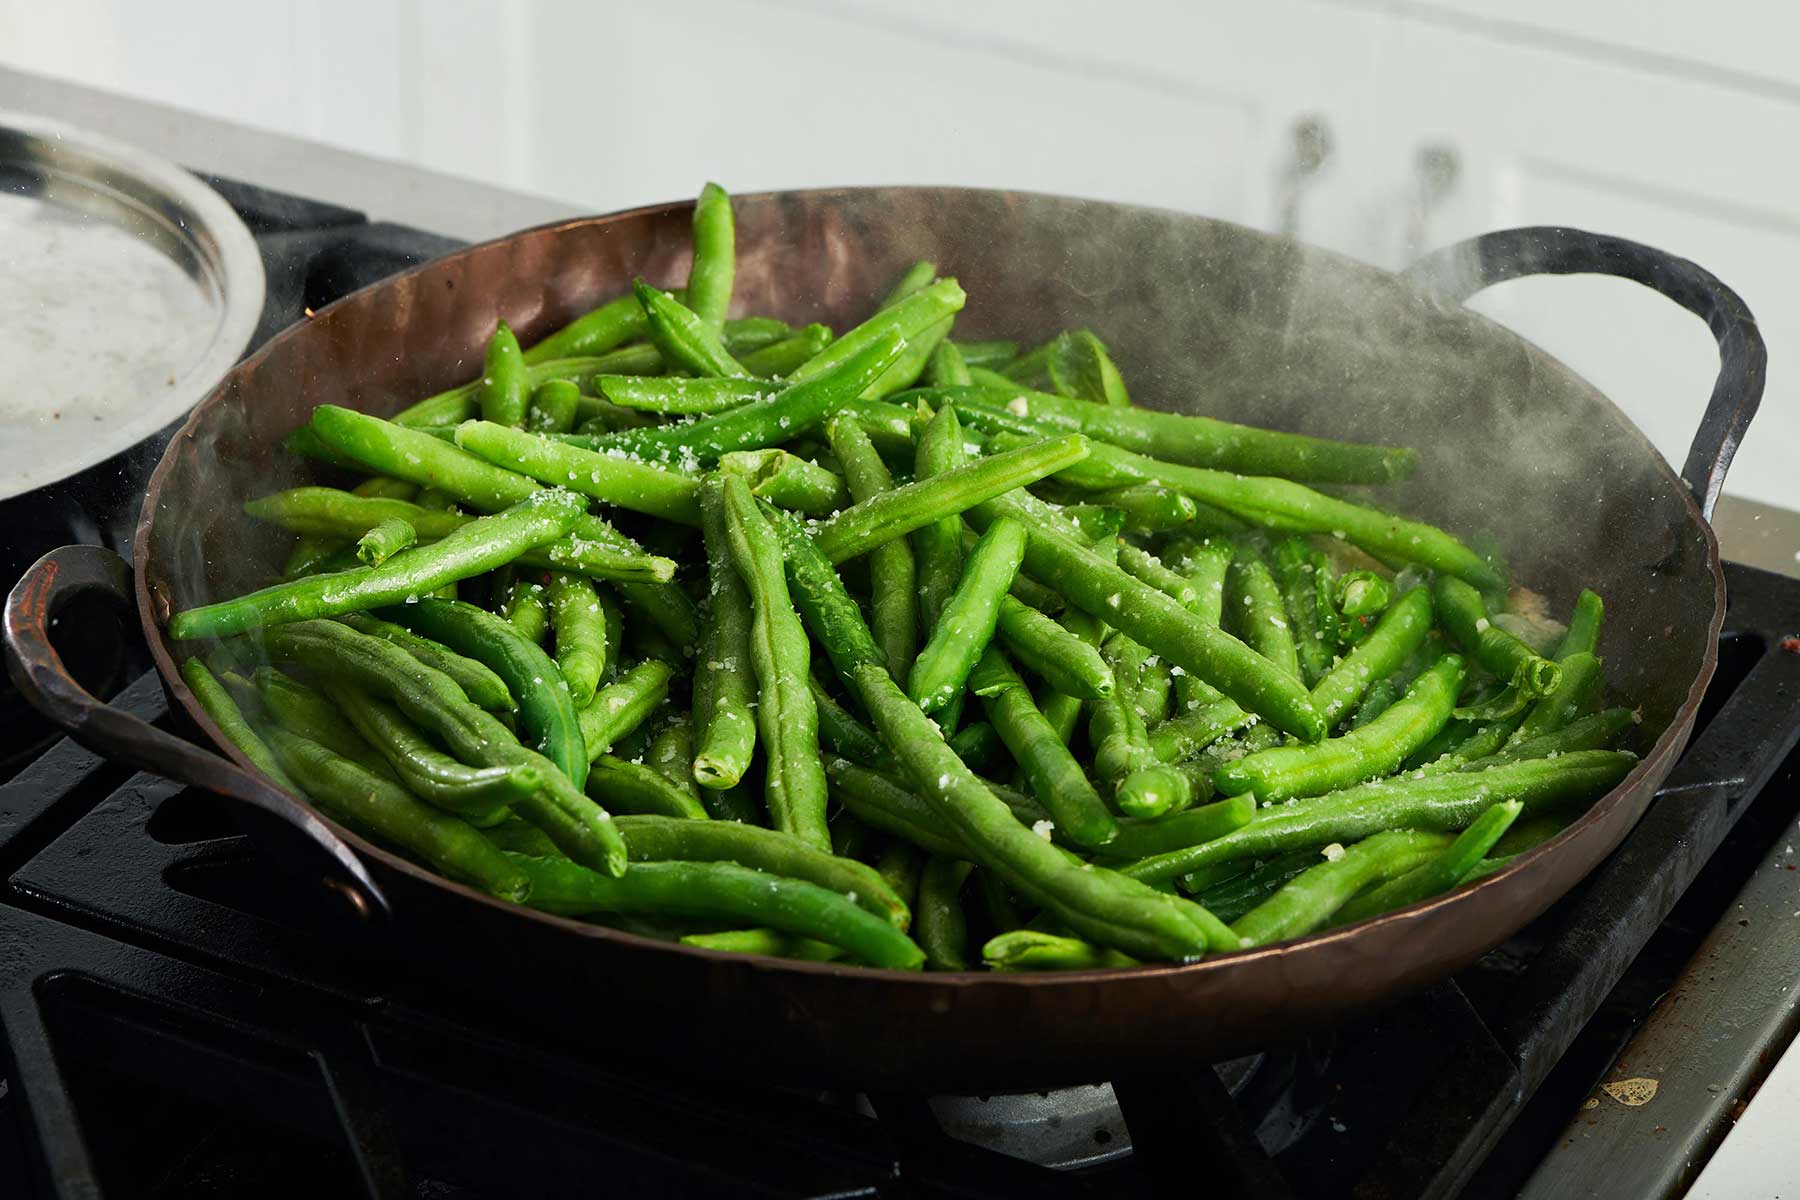 Steam coming off of a skillet of green beans.